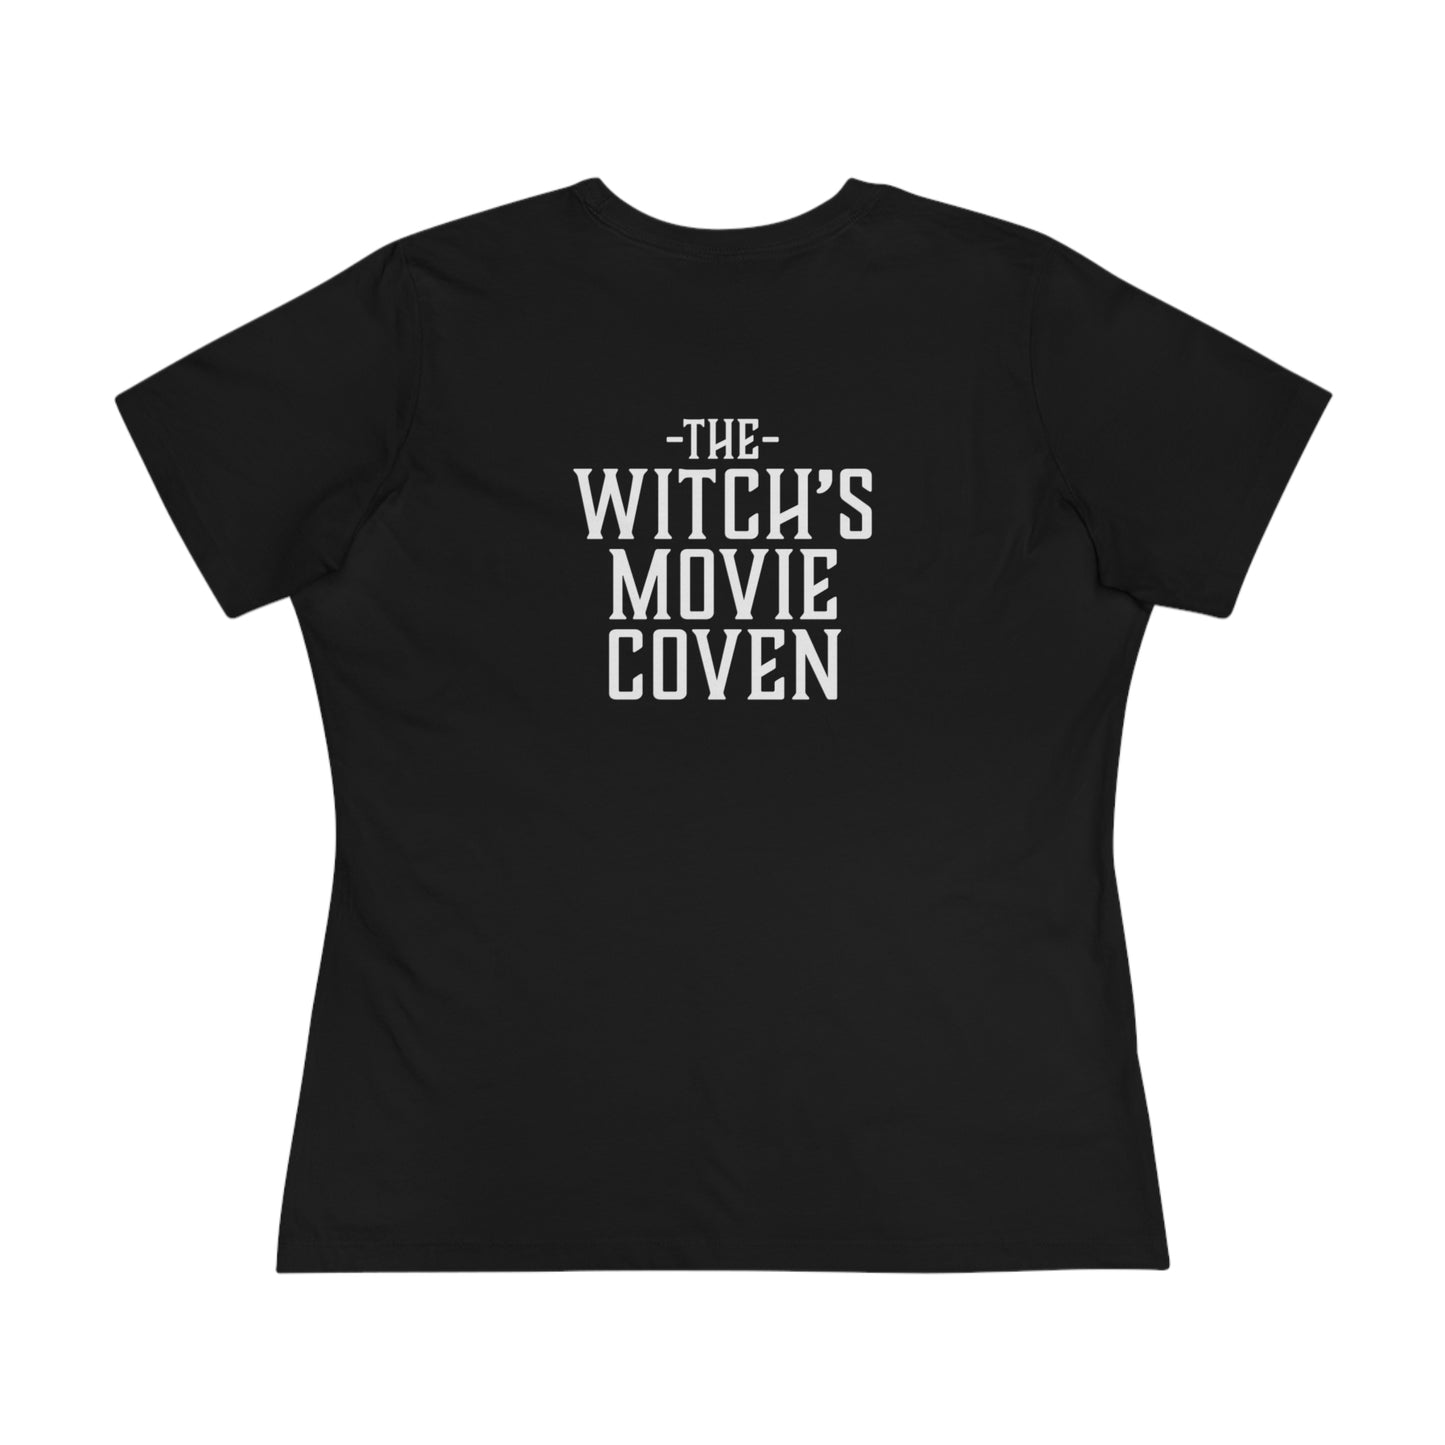 Witches Movie Coven - "I Didn't Mind It" Premium Women's T-Shirt